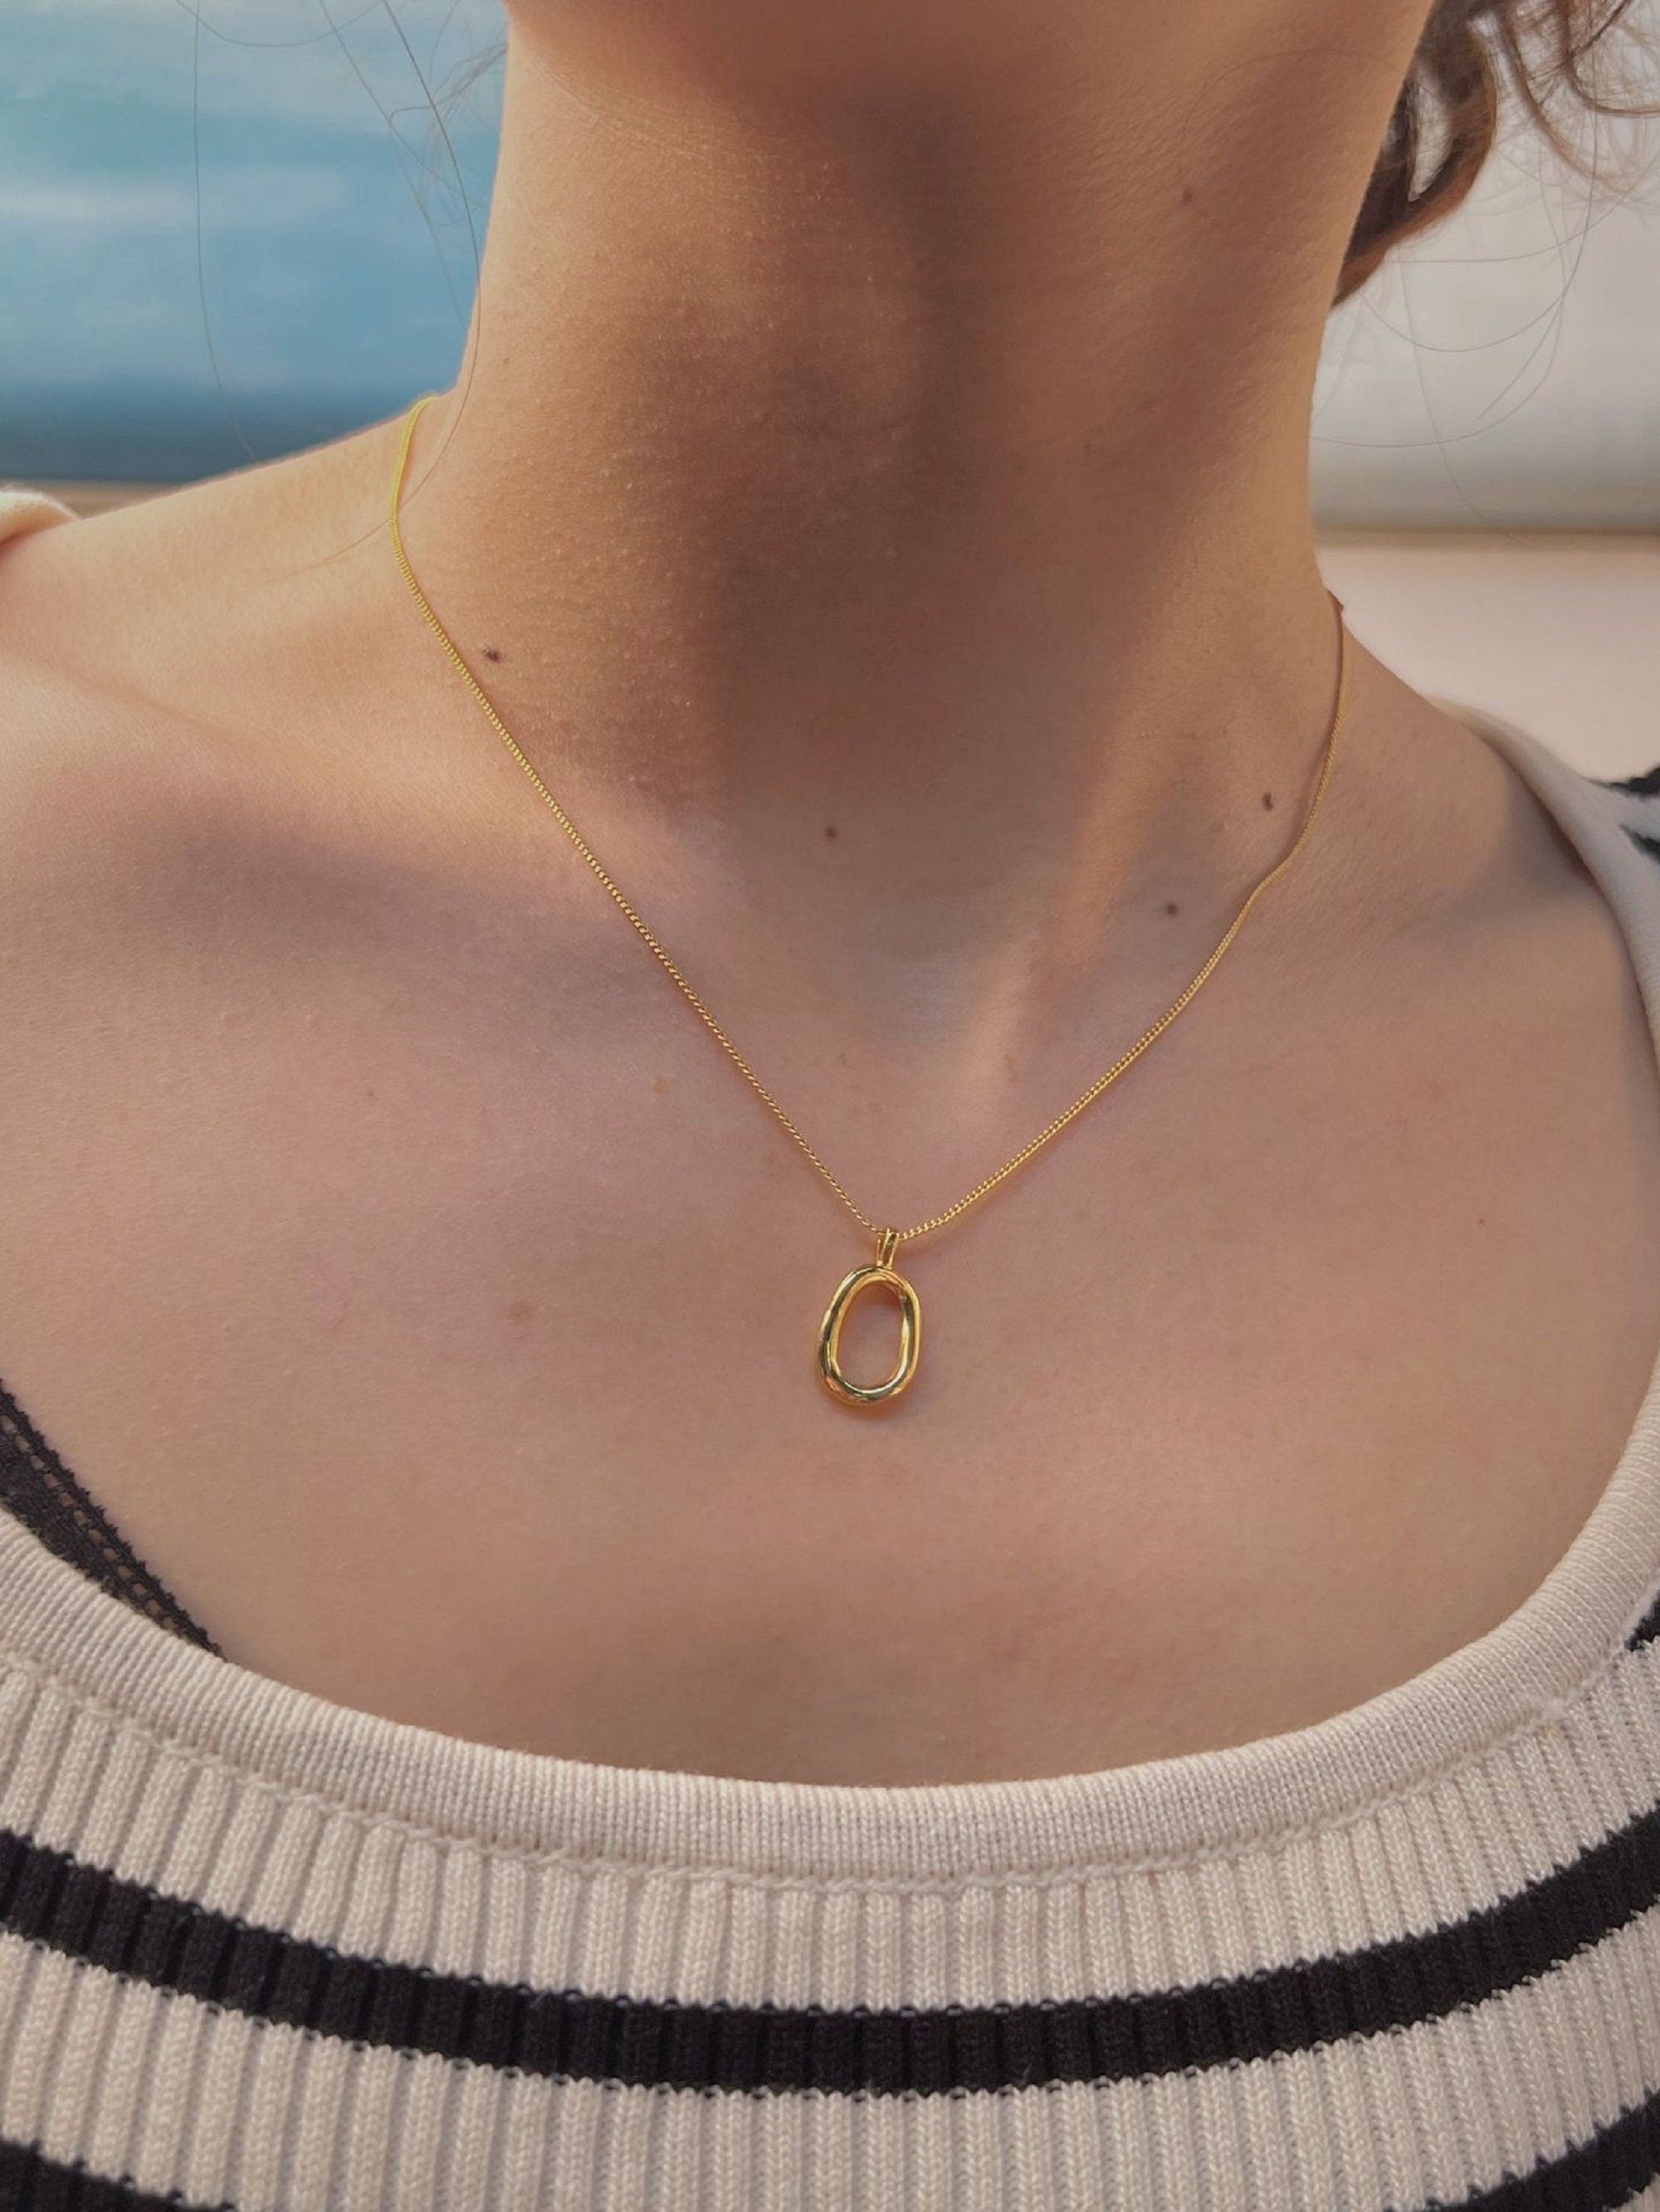 Gold Necklace with Sterling Silver Beads; Minimal Gold Necklace; Dainty Gold Necklace; Delicate Layering Gold Necklace;